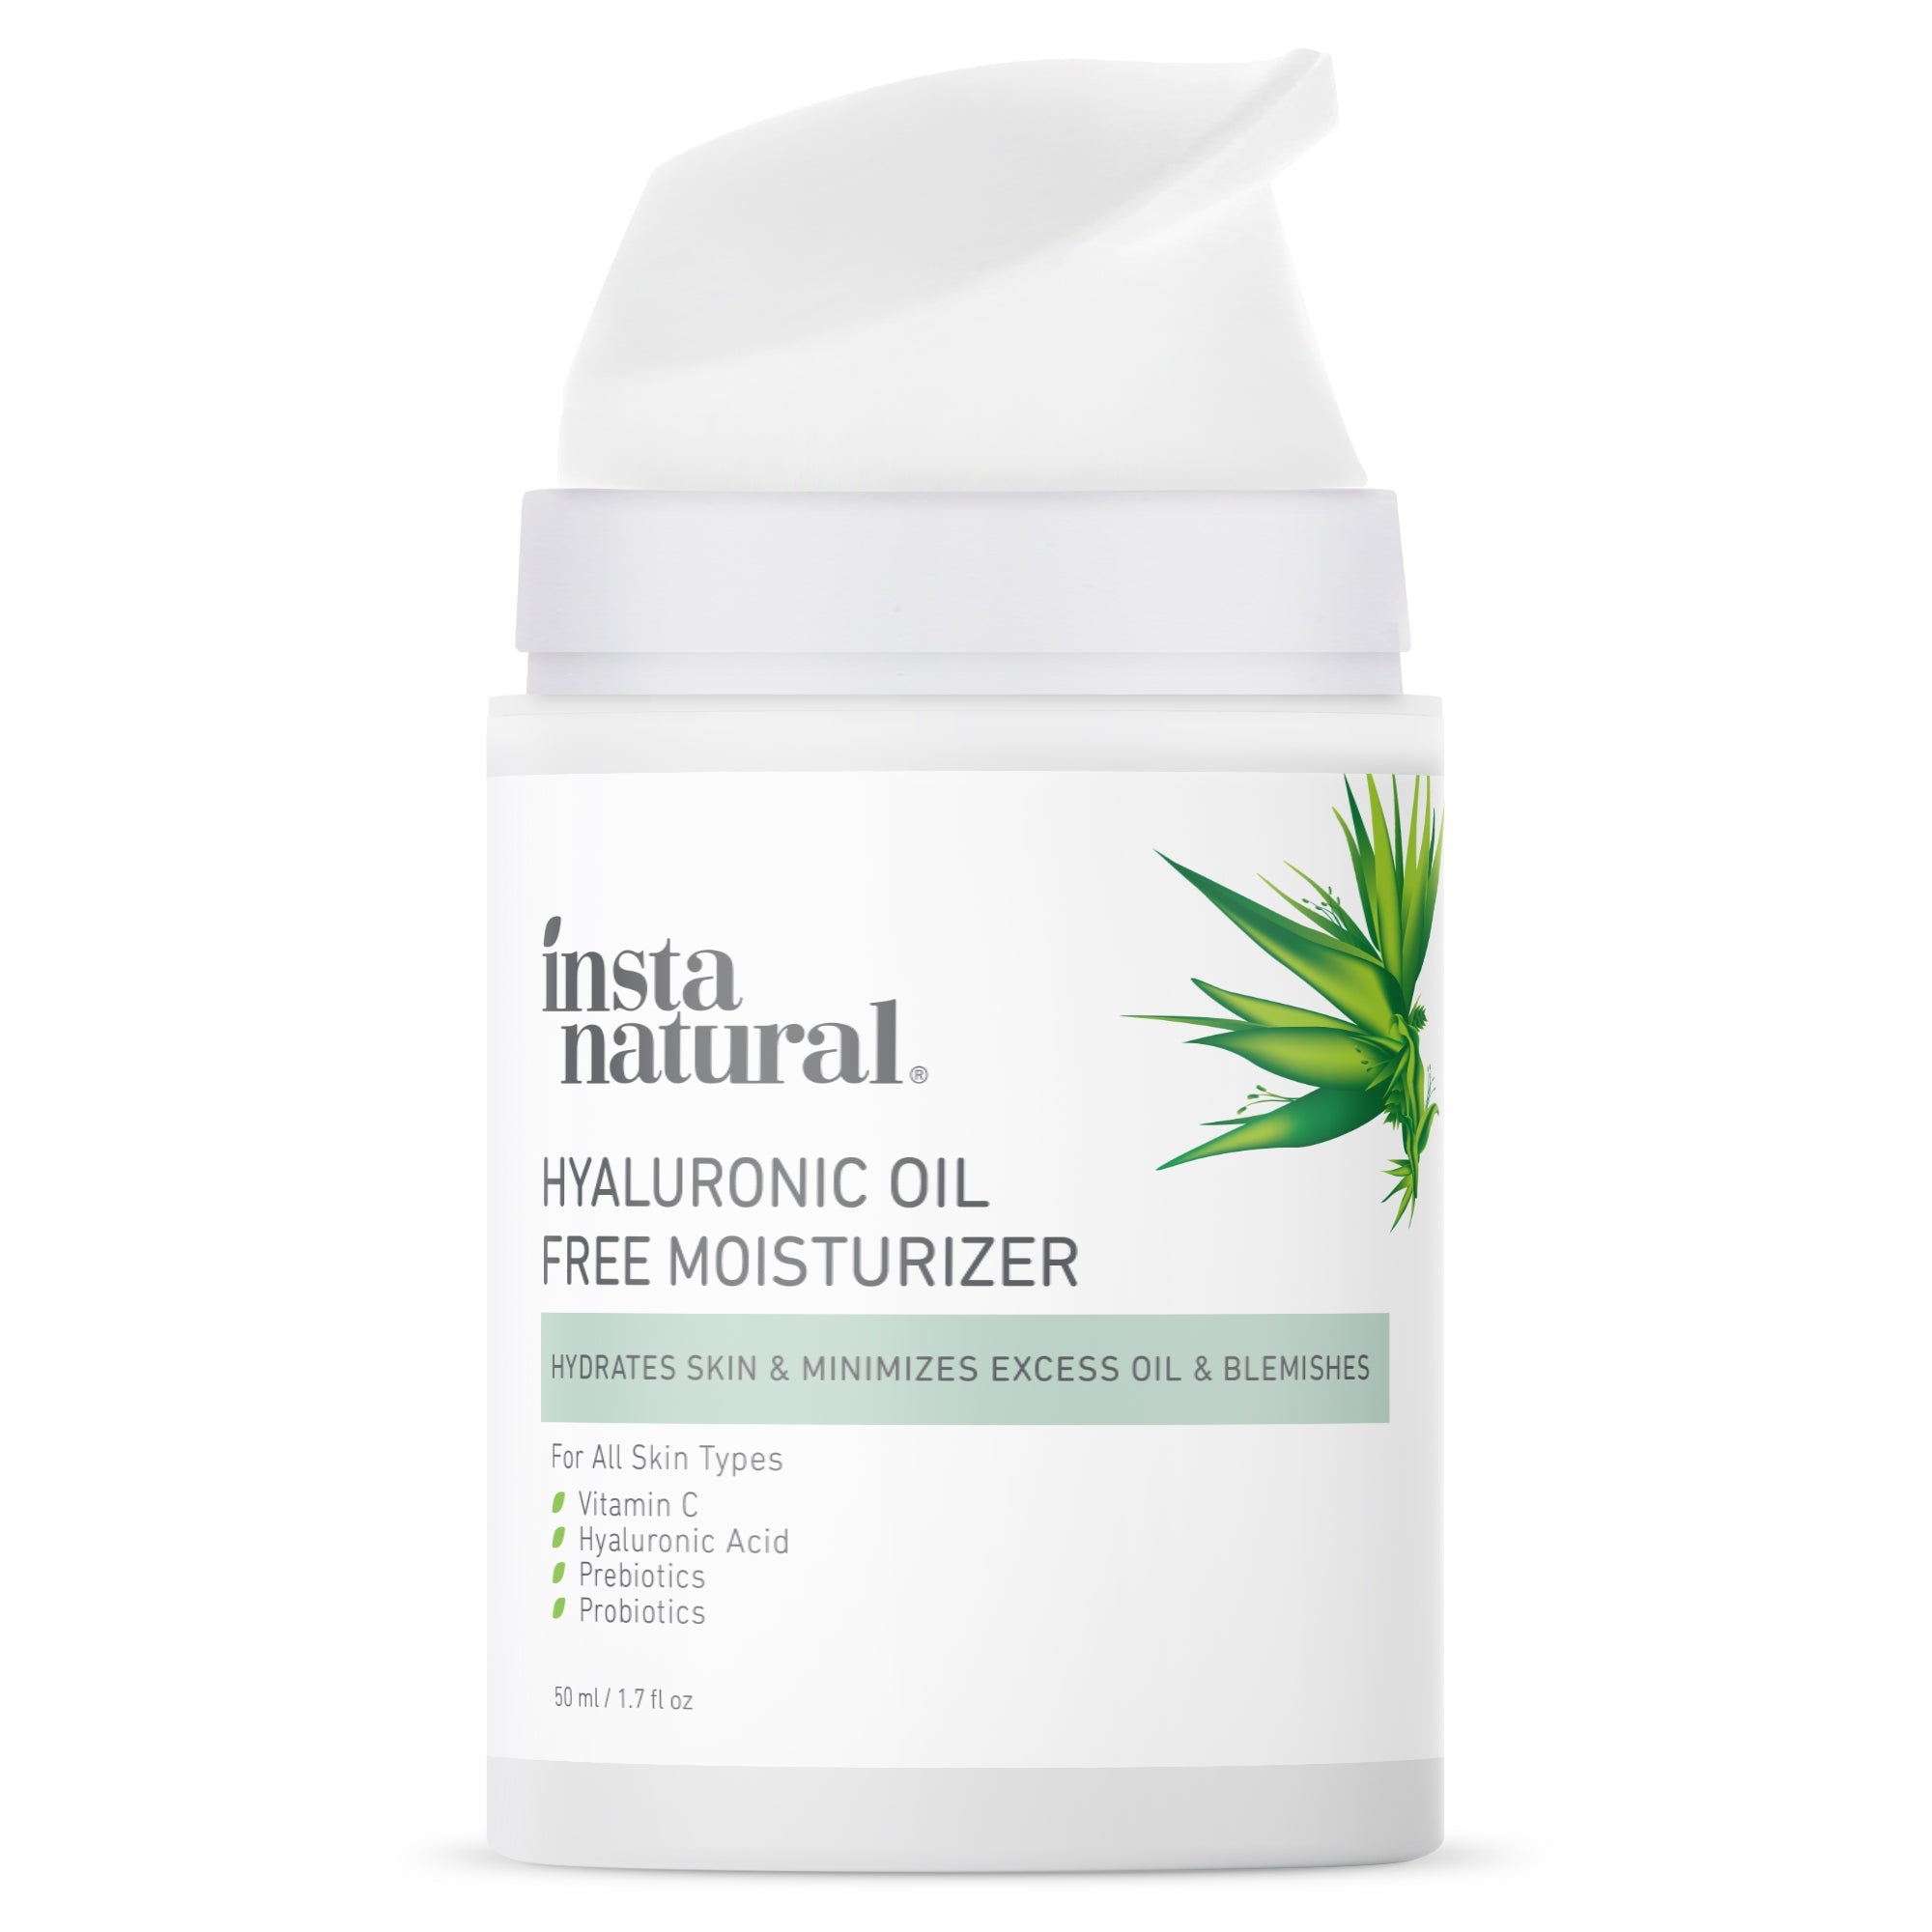 InstaNatural Hyaluronic Oil Free Moisturizer